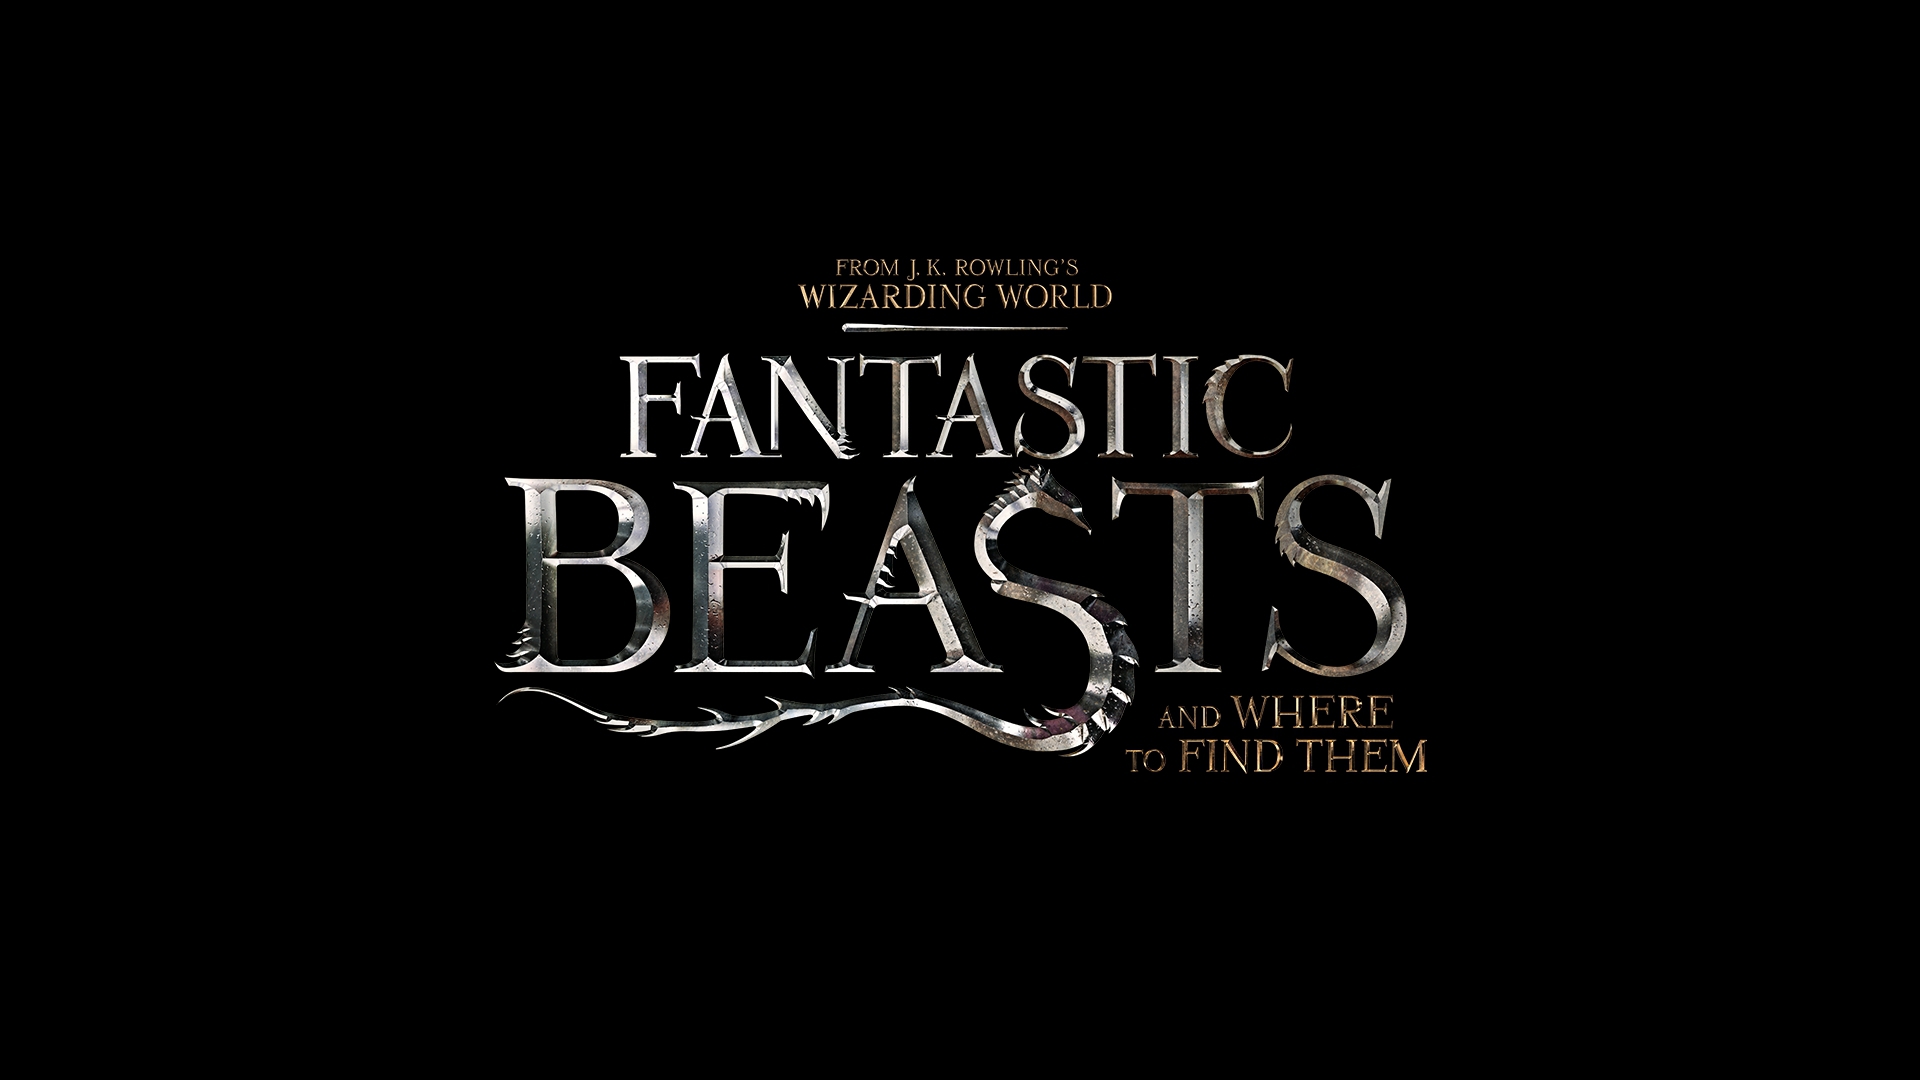 Movie Online Fantastic Beasts And Where To Find Them Full HD 2016